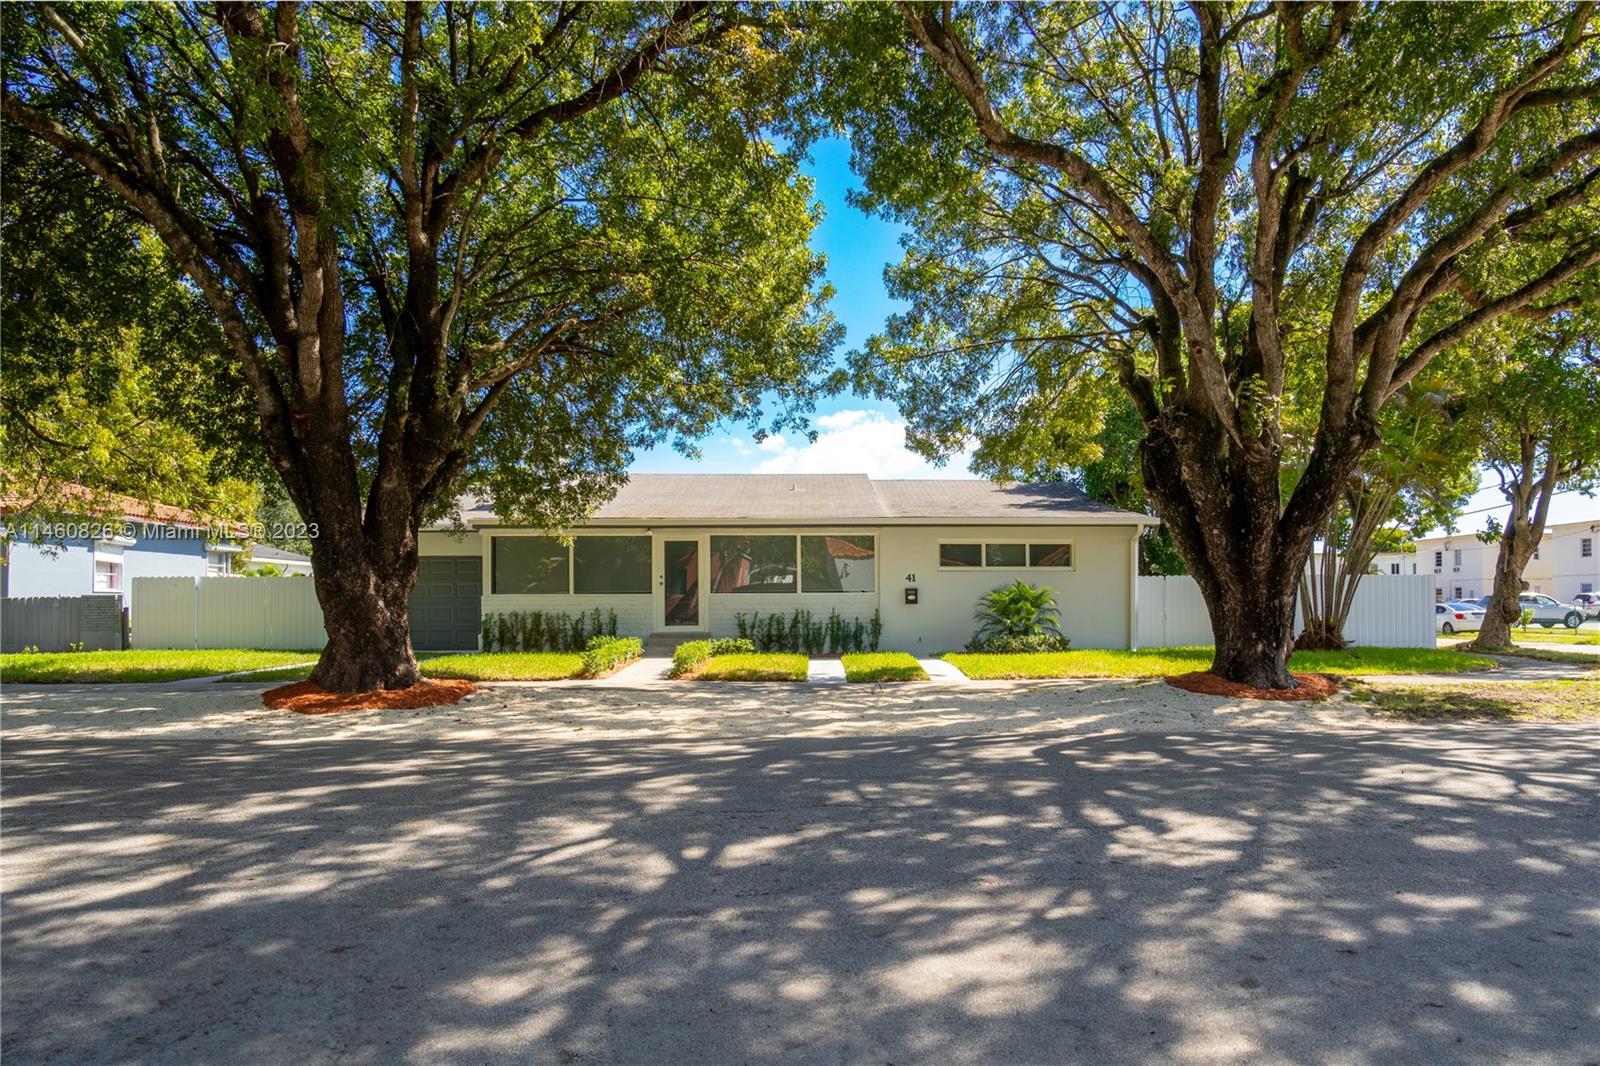 Photo of 41 NW 40th Ave in Miami, FL